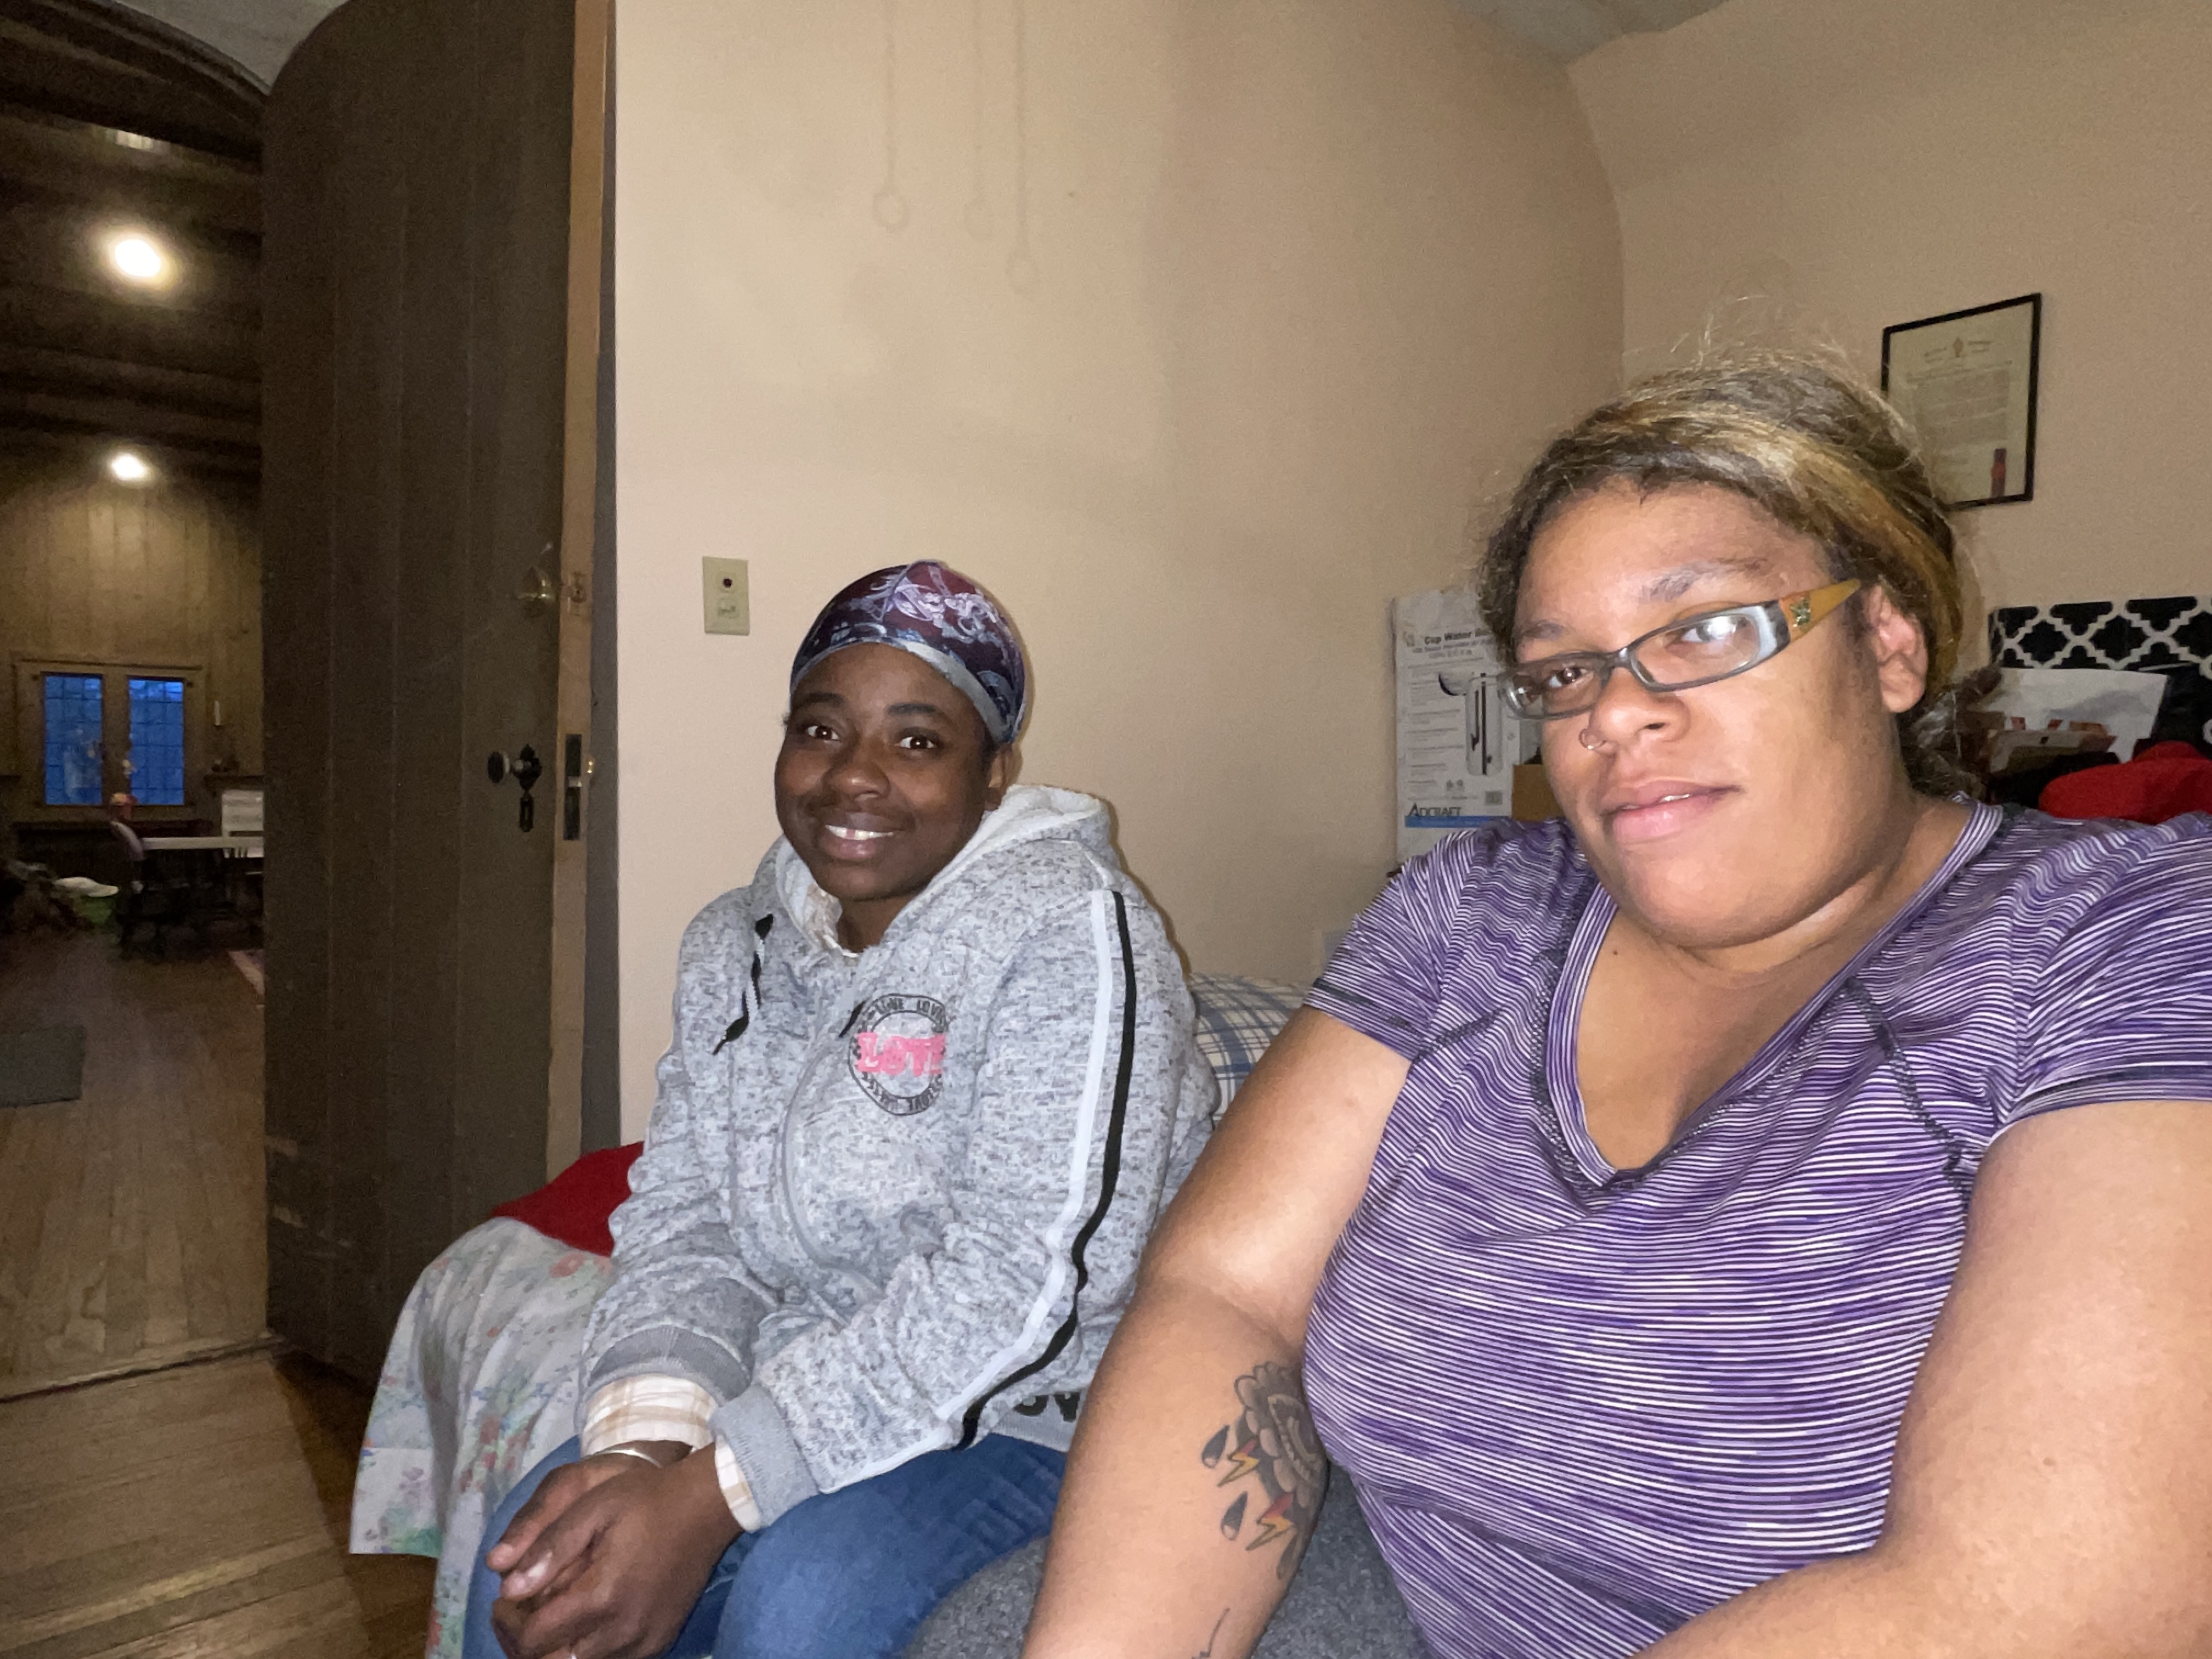 Tiarra, left, and Tasha have been effectively homeless since the pandemic, as even jobs paying over minimum wage have not been able to keep pace with housing costs. The pair, who have been friends since their early teens, said that finding the Maureen's Haven winter shelter program last month was a godsend, but the program ended for the season on March 31, leaving them to return to Brentwood and uncertainty for the future.